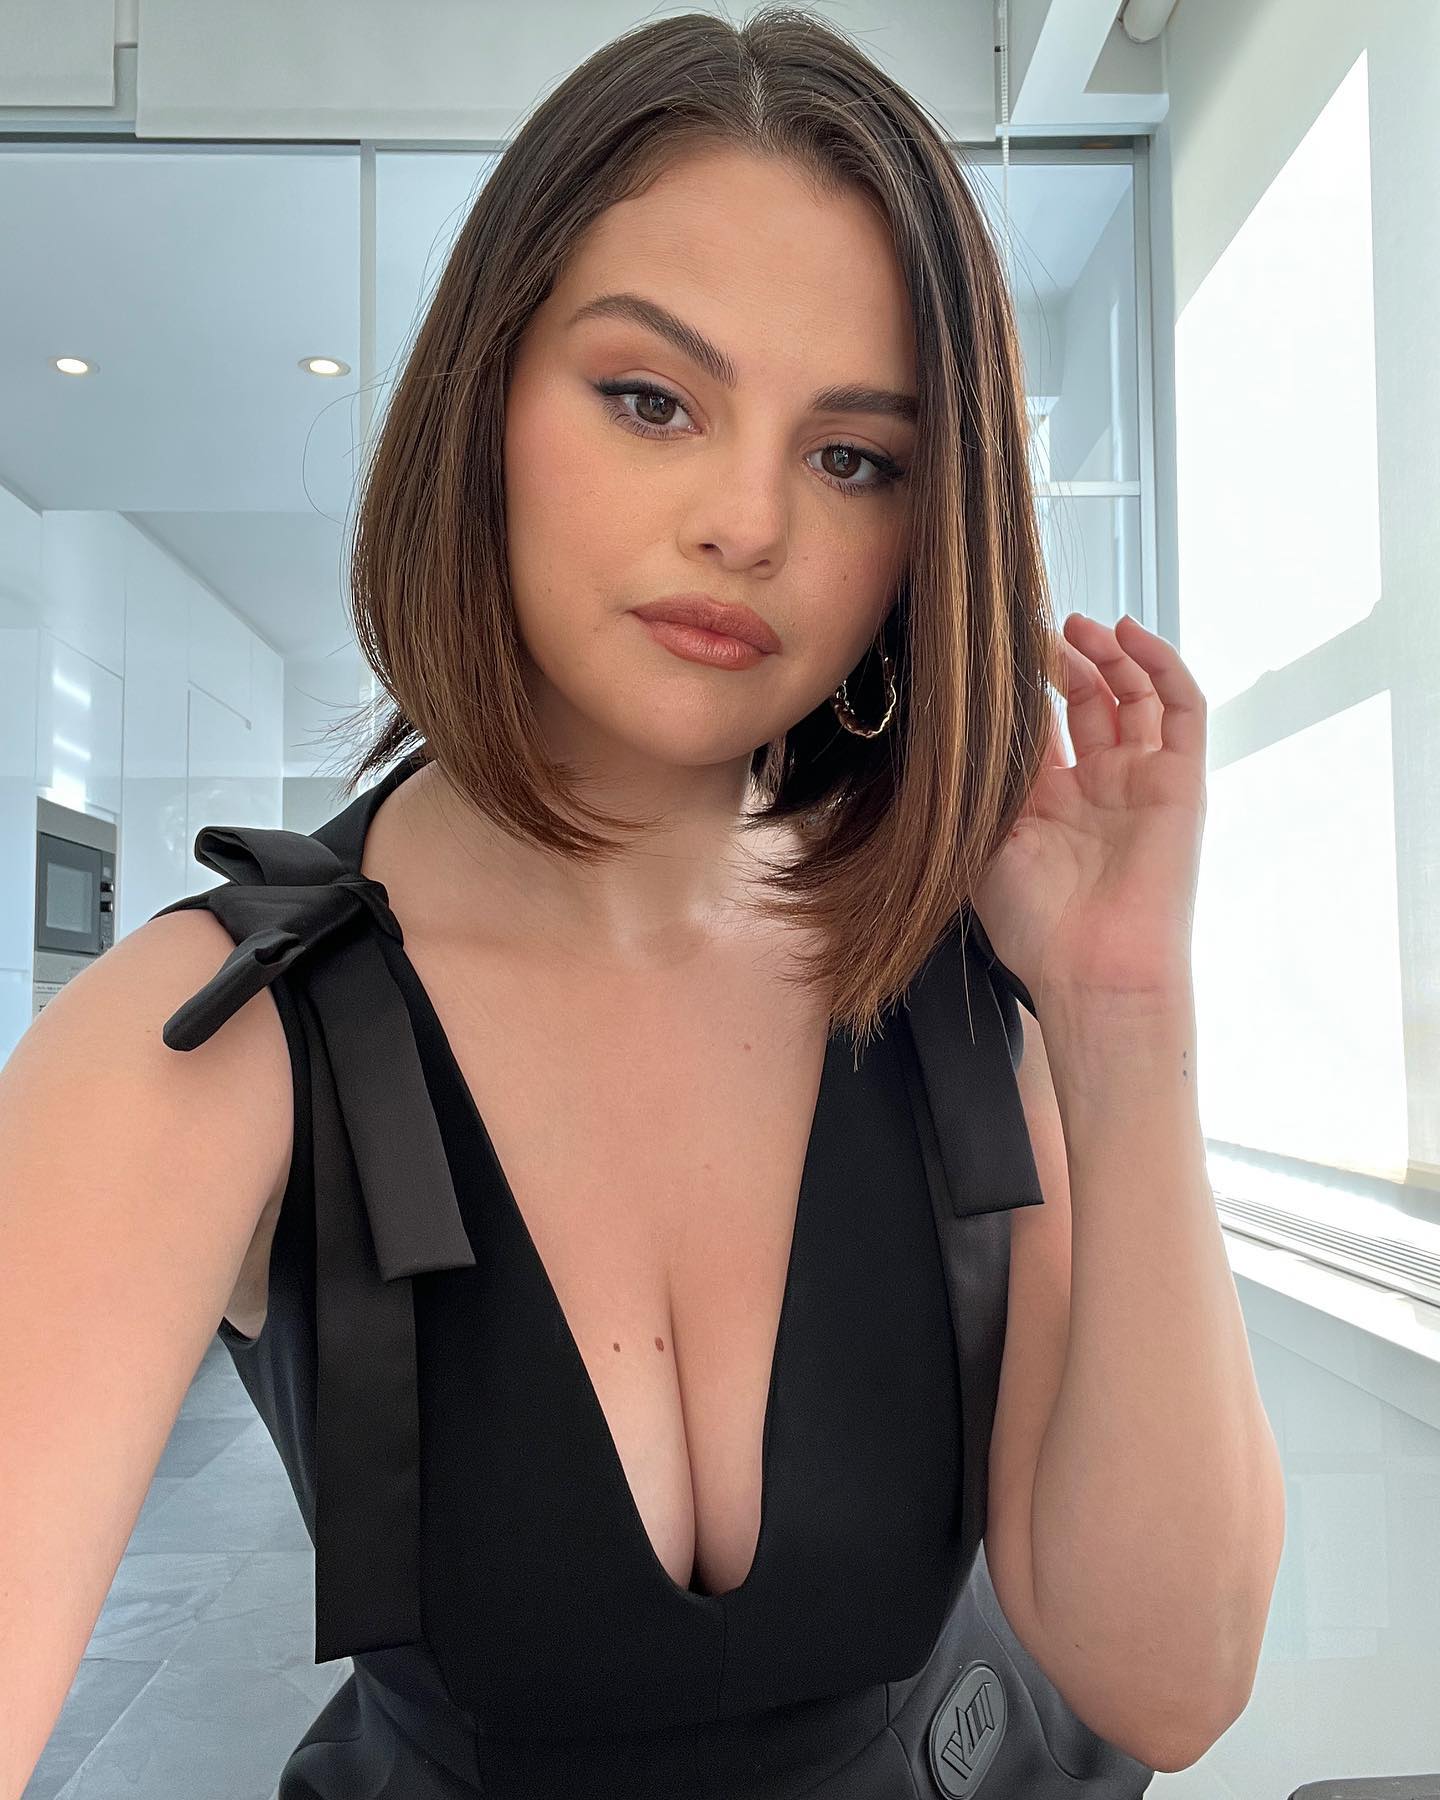 Selena Gomez Braless Pictures: Photos of Her Not Wearing a Bra